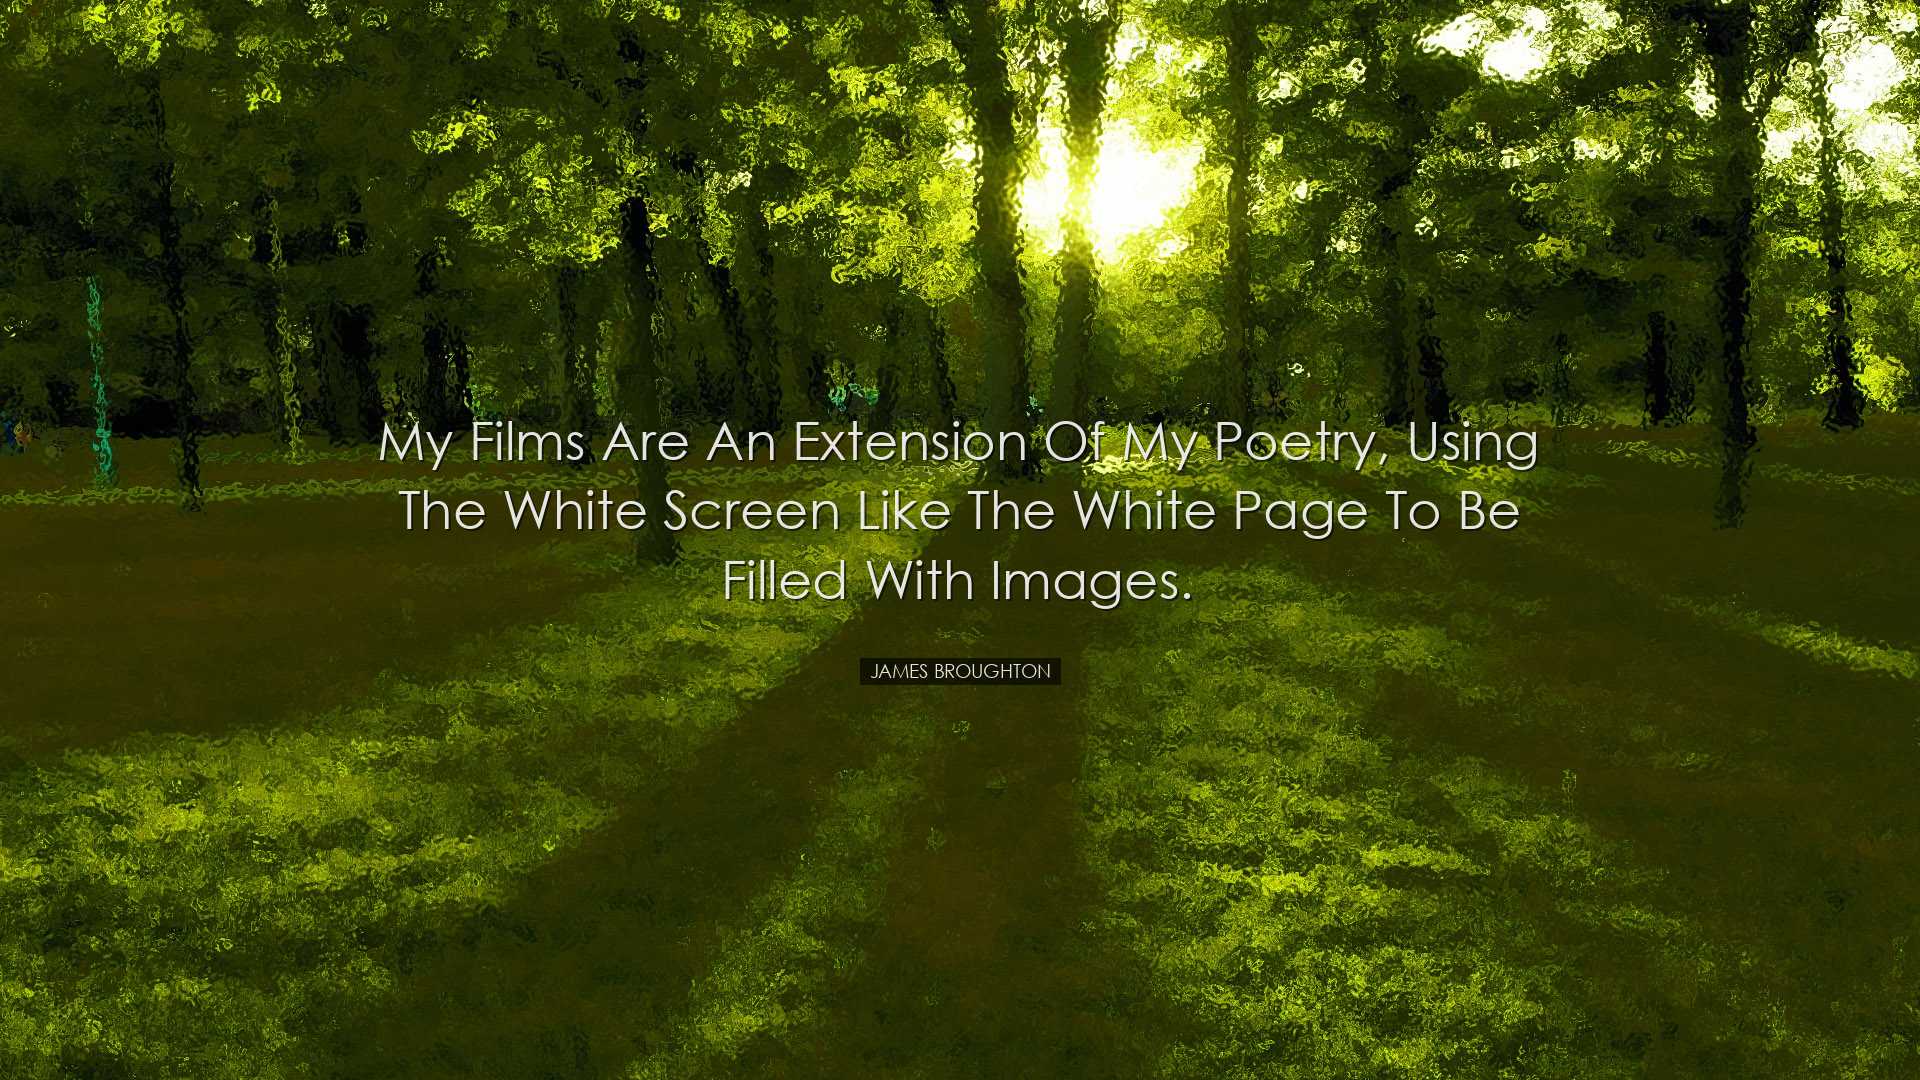 My films are an extension of my poetry, using the white screen lik